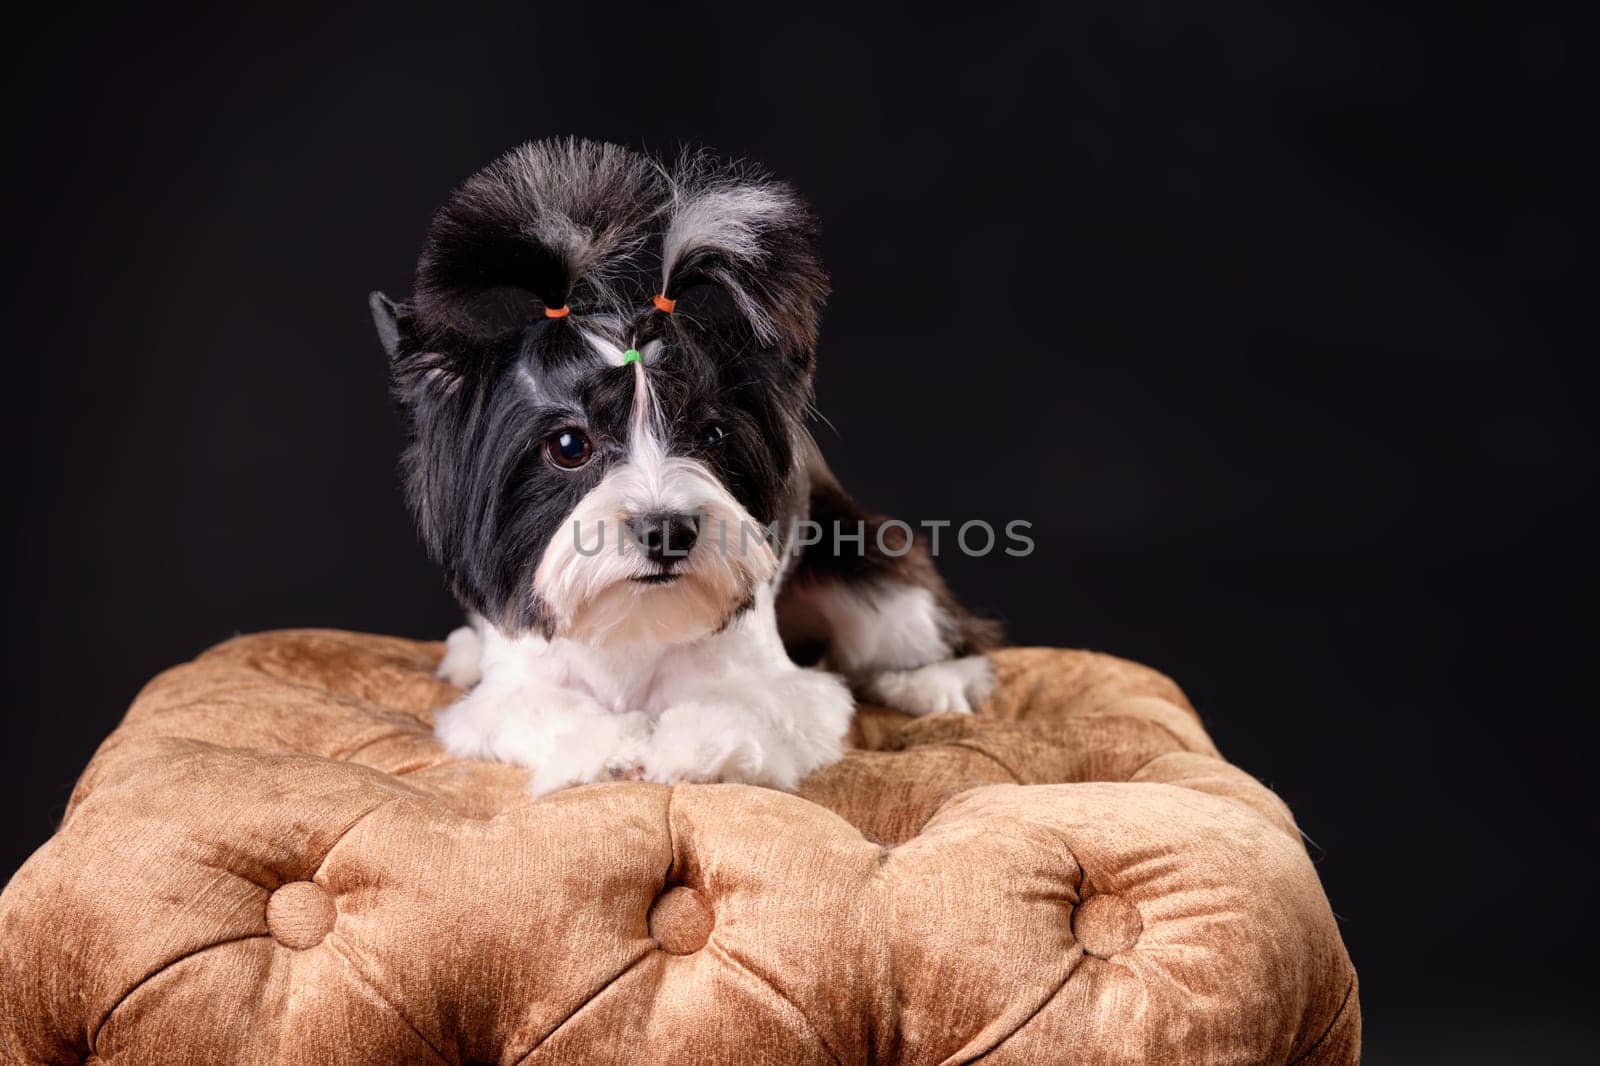 A Beaver Yorkshire Terrier dog lies on a golden ottoman on a black background